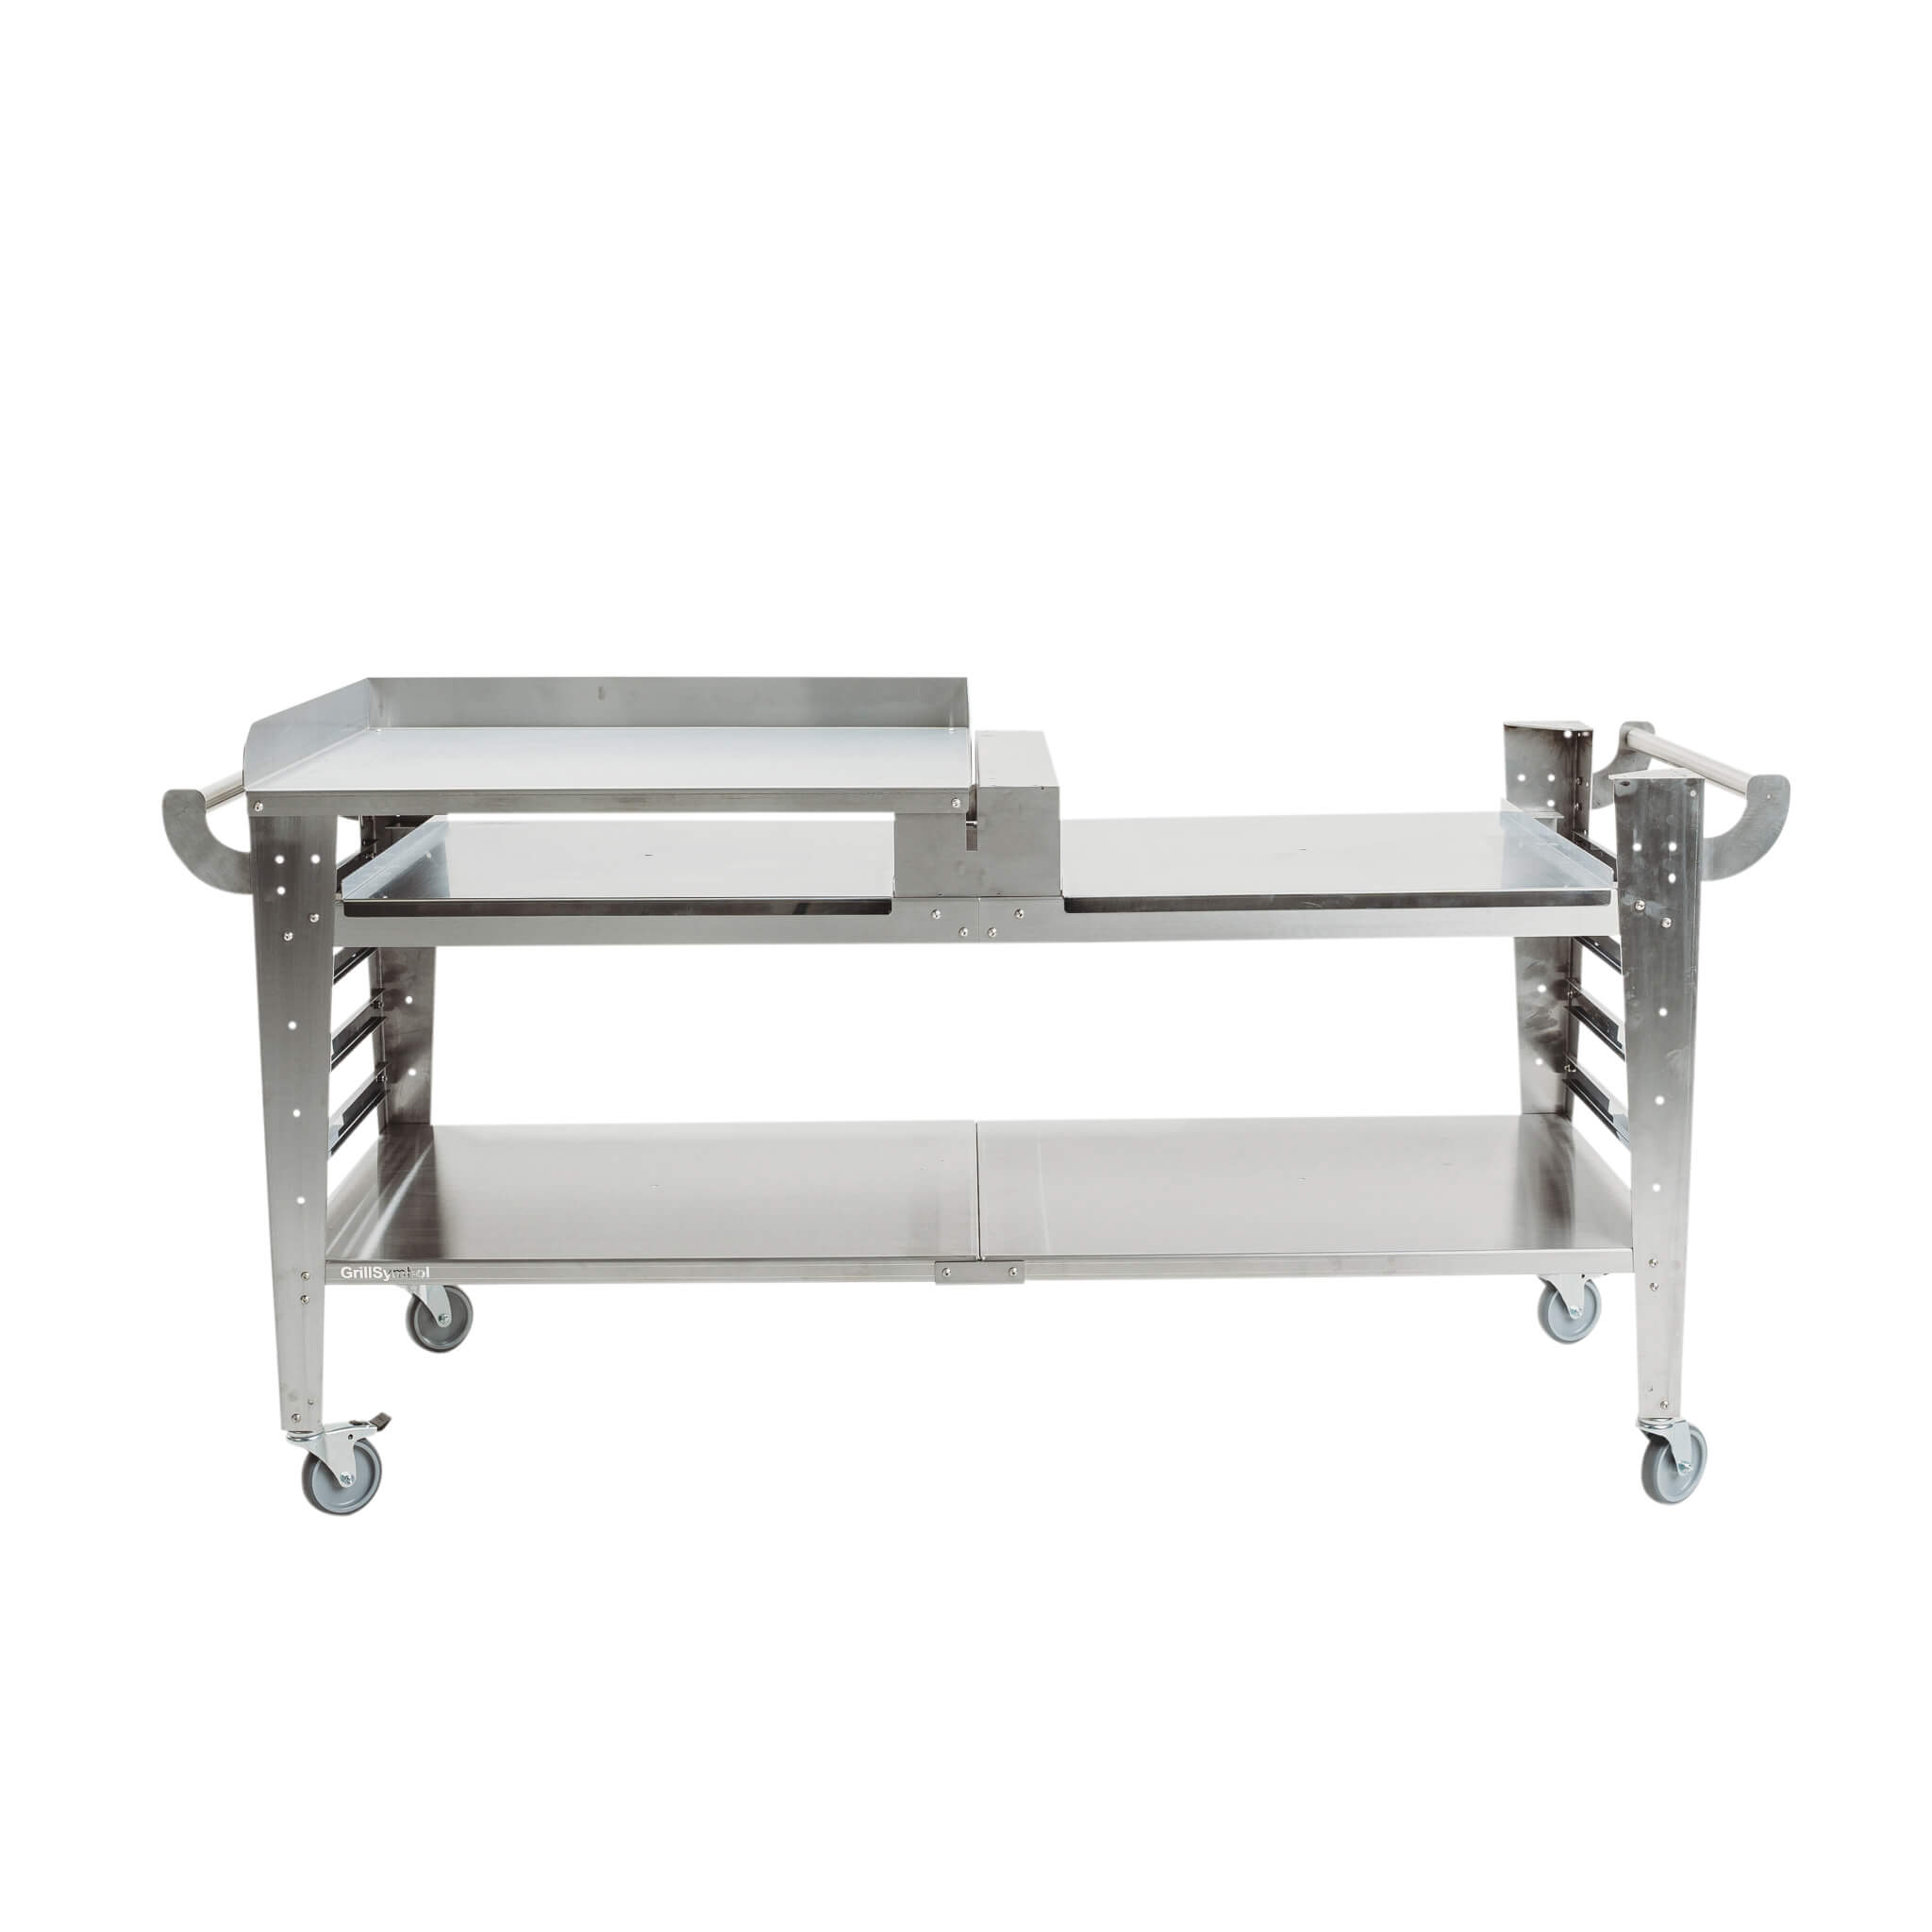 GrillSymbol stainless steel Side Table
 for Pizza Oven Baso-inox-XL